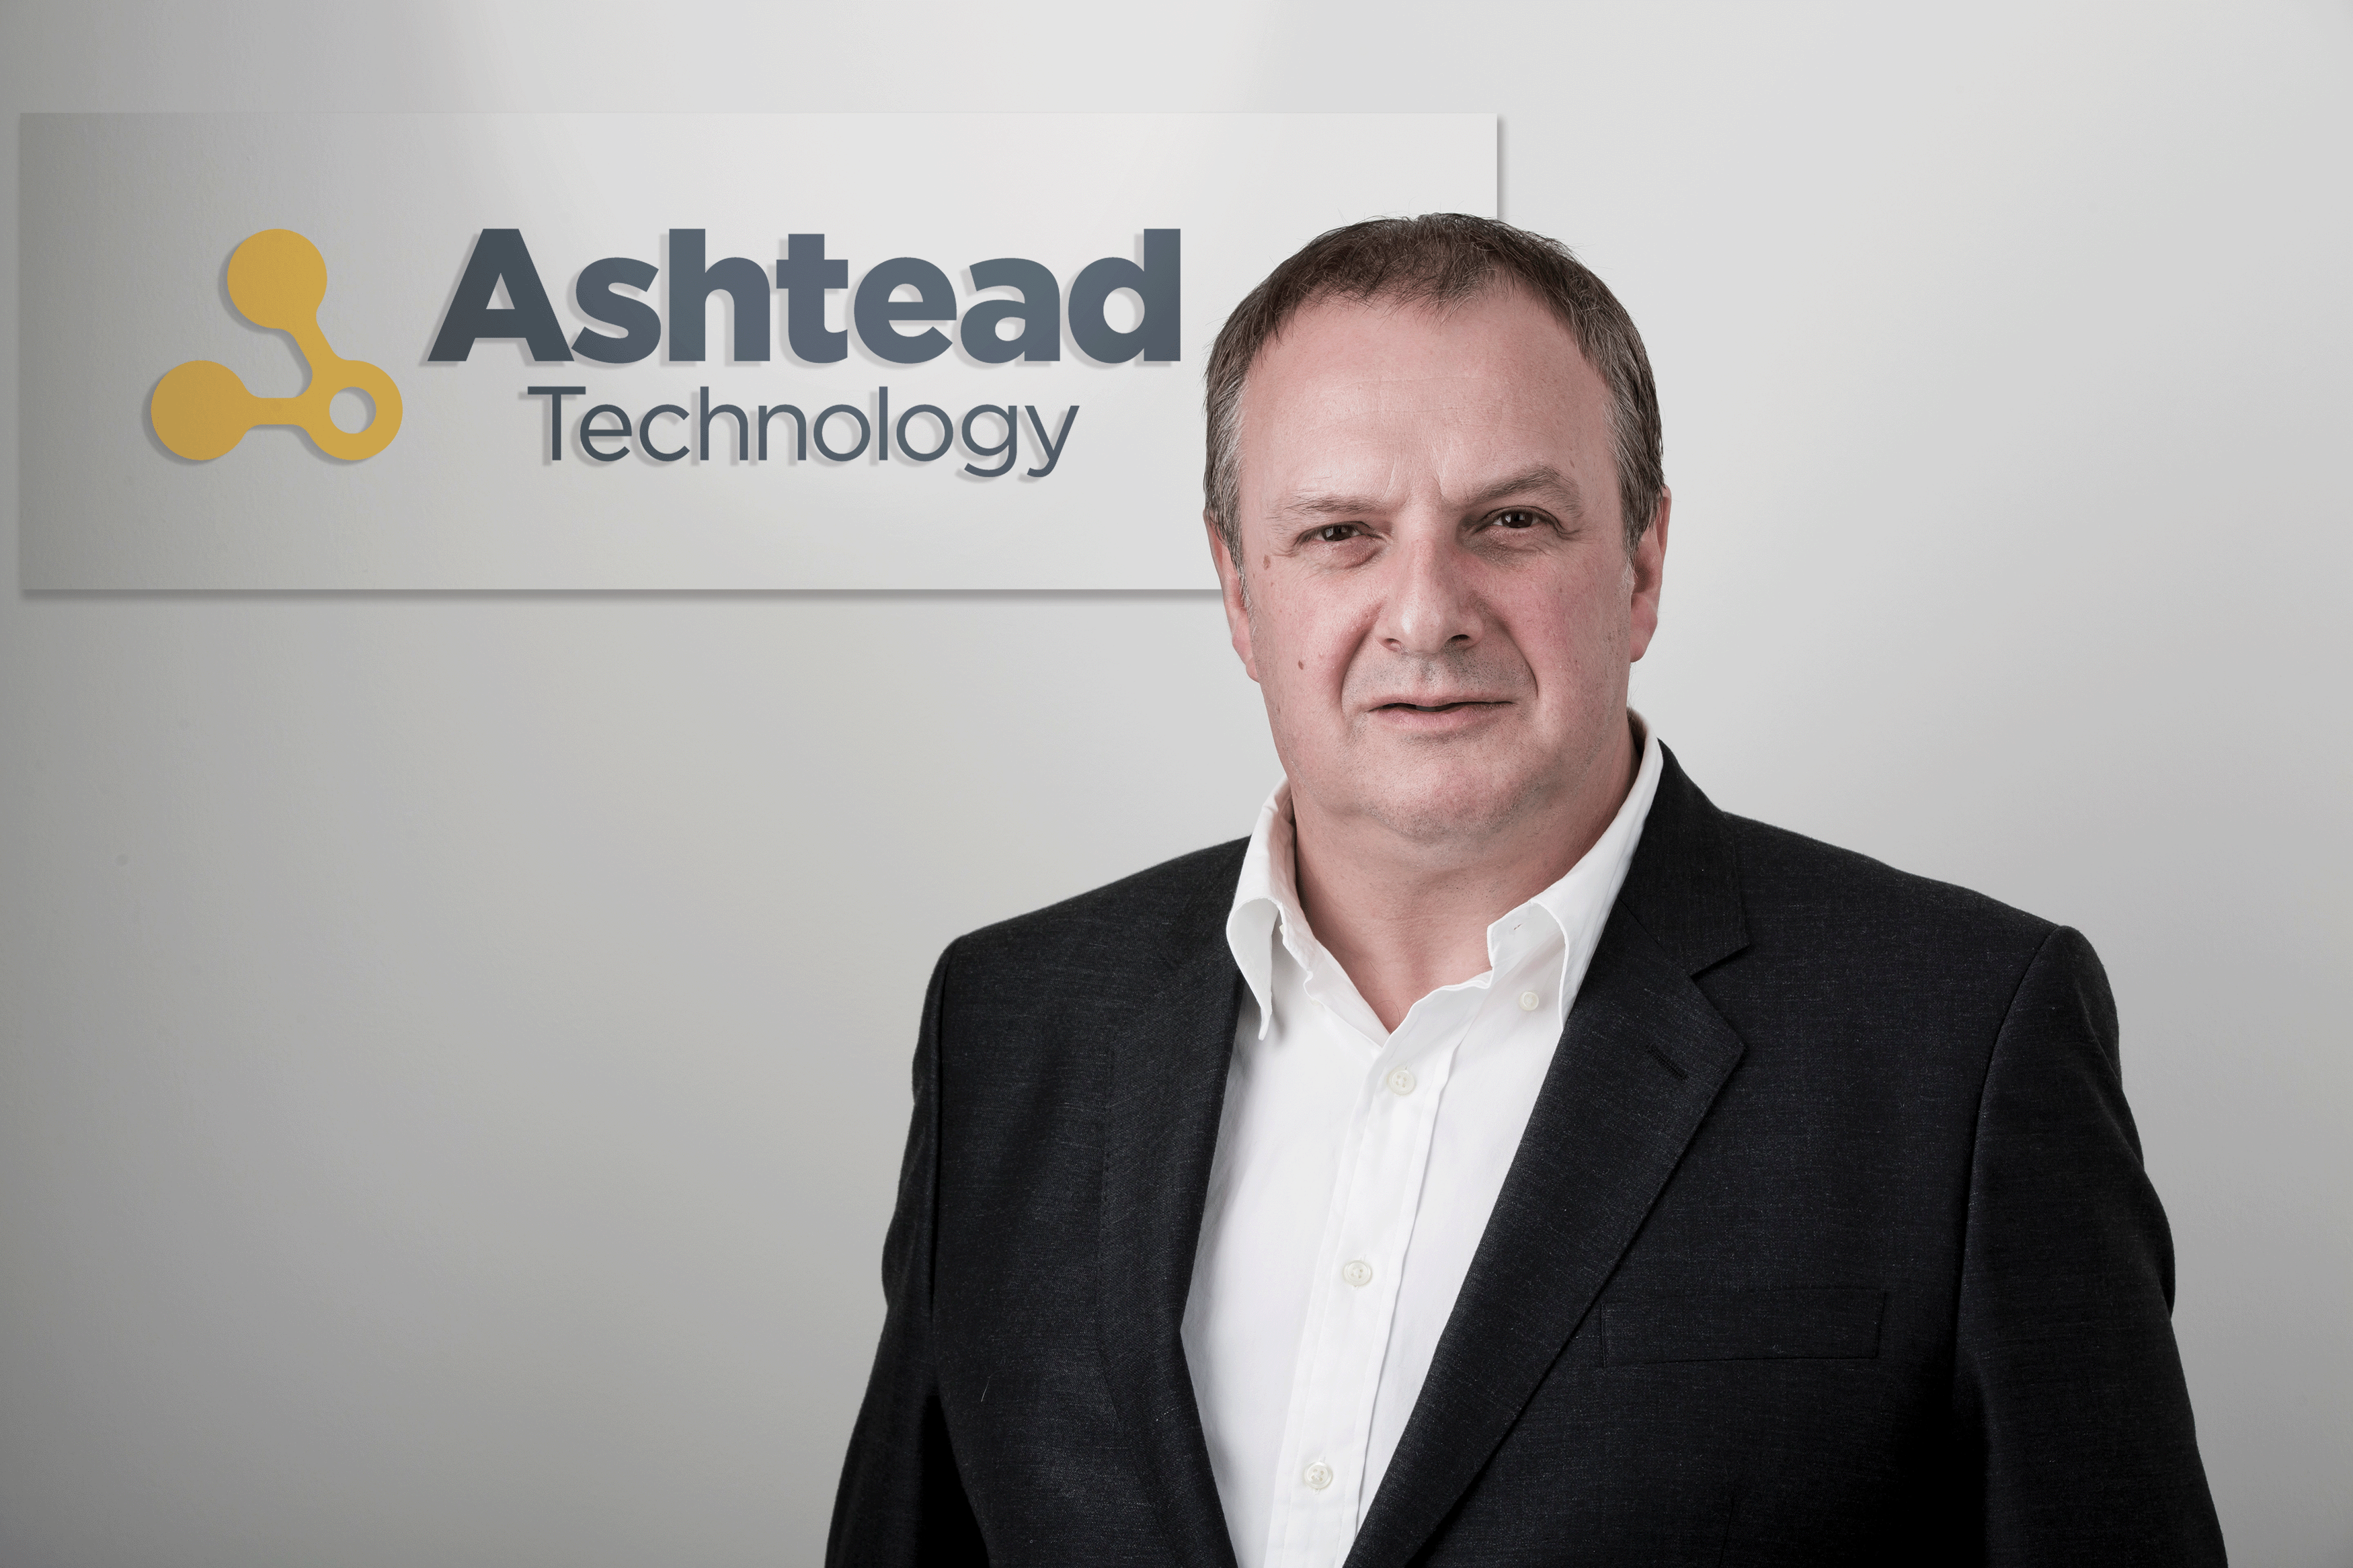 MEMBER NEWS: Ashtead Technology completes first significant subsea monitoring project using LUMA modems